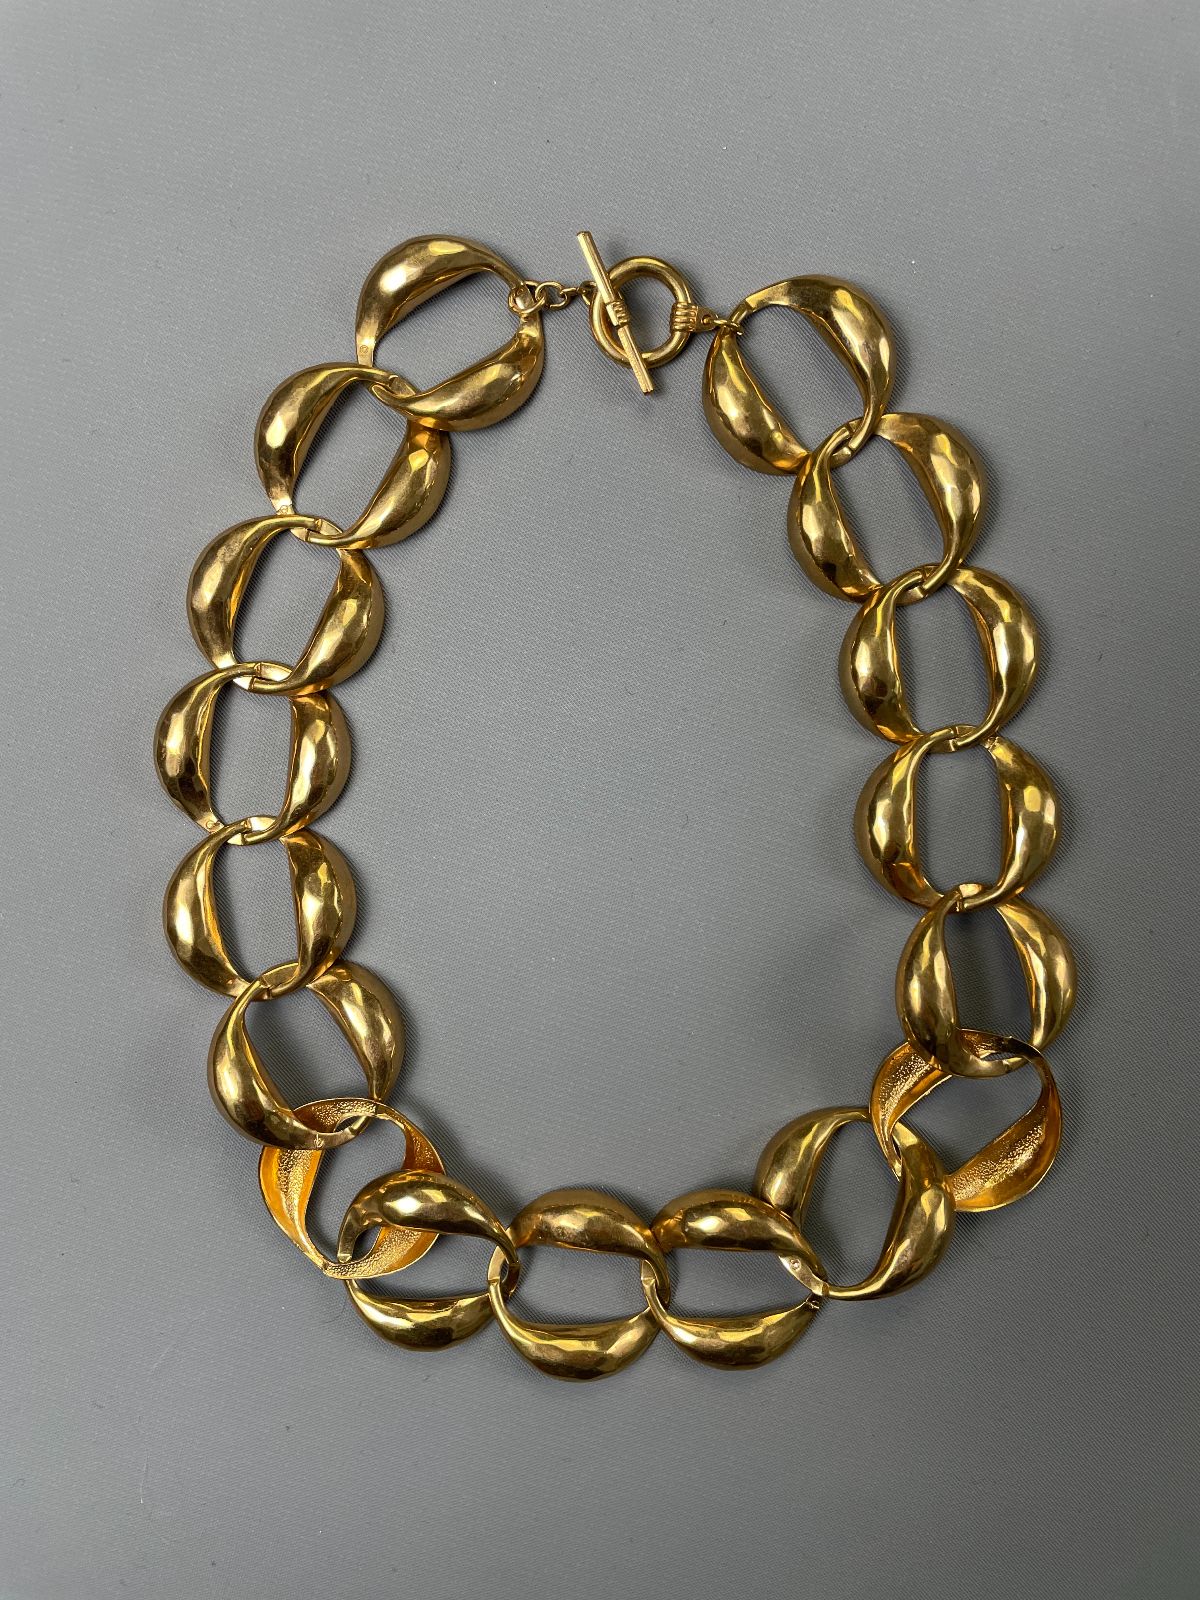 product details: 1980S-90S HIGH POLISHED LIGHTLY HAMMERED OVERSIZED CHAIN LINK STATEMENT NECKLACE TOGGLE CLOSURE photo